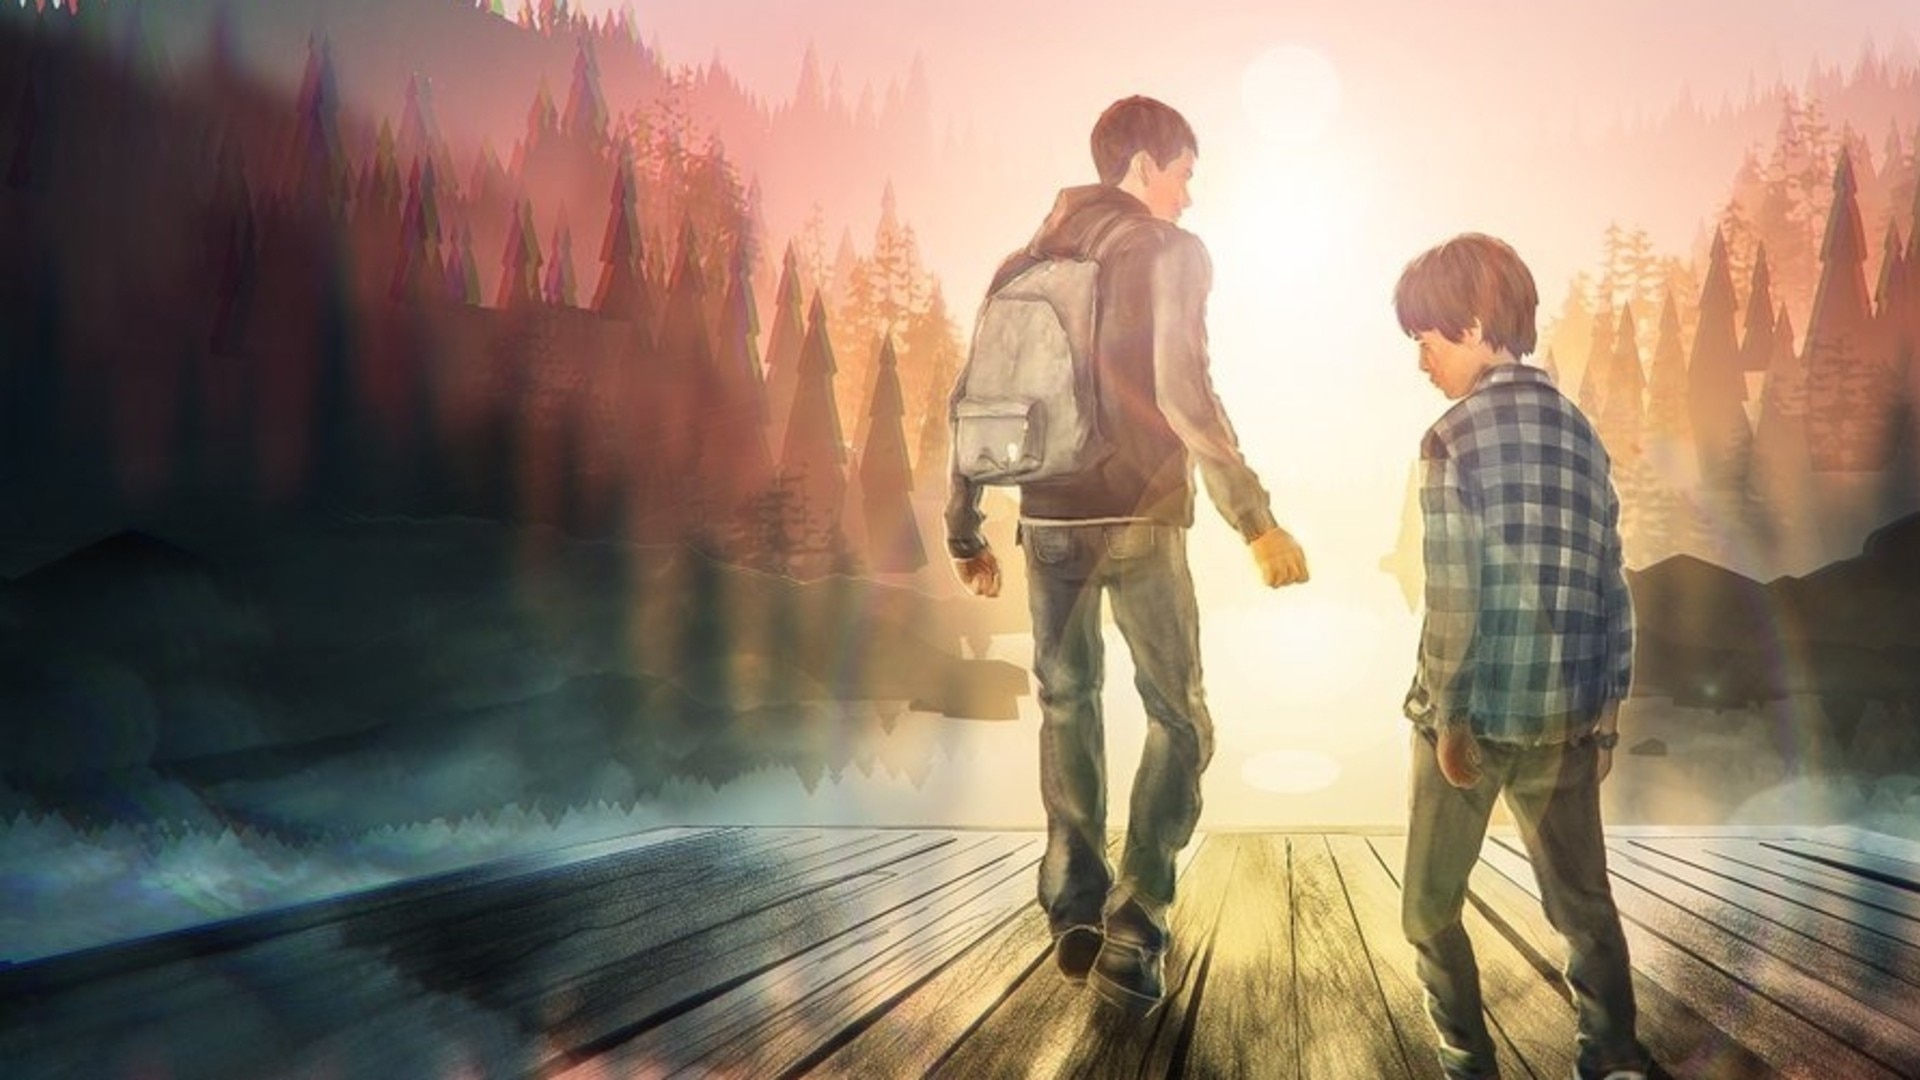 Life s not being lived. Life is Strange 2. Арты жизнь. Life is Strange арт. Игра про двух братьев.